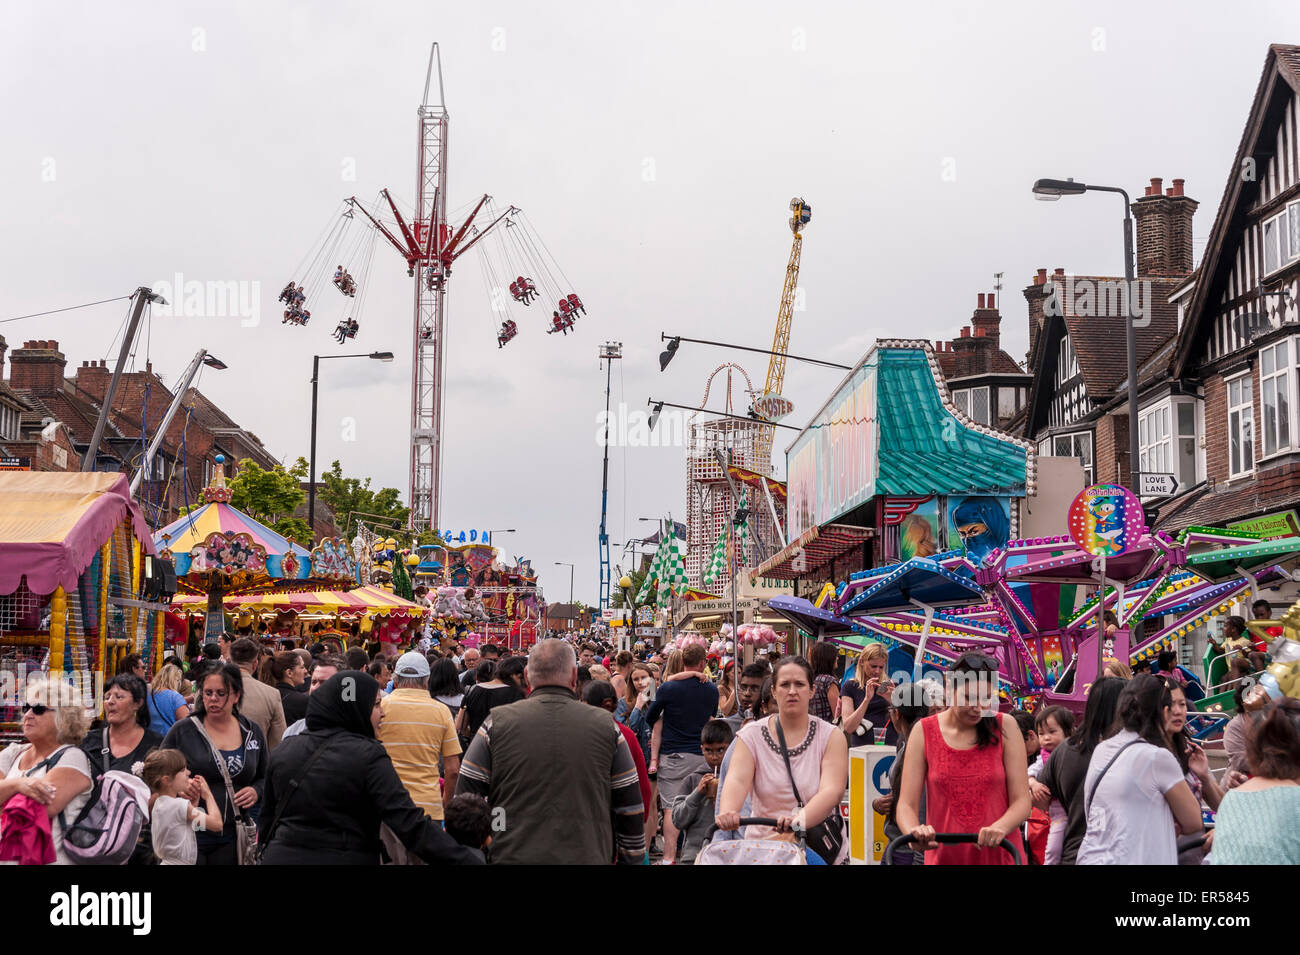 Pinner, London, UK.  27 May 2015.  Hundreds of people gather in Pinner, north-west London, for Pinner fair.  The town has had an annual street fair held in May since 1336, when it was granted by Royal Charter.  It remains popular with schoolchildren and families during the half-term holiday, on the first Wednesday following Whitsunday. Credit:  Stephen Chung / Alamy Live News Stock Photo